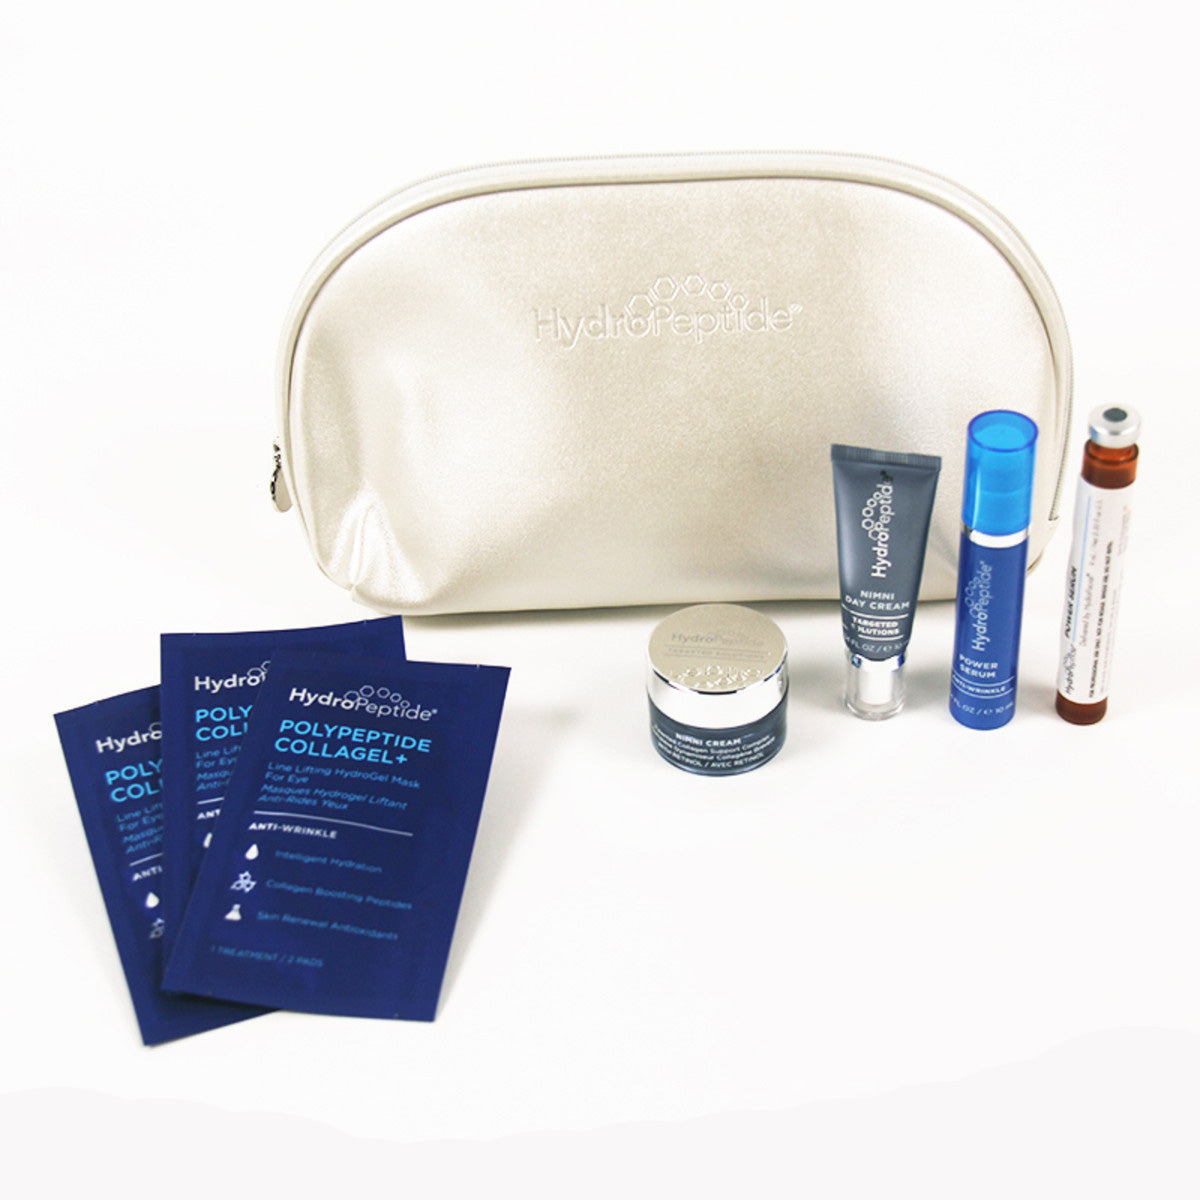 EDGE/HYDRAFACIAL HydroPeptide Collagen Beauty Boost Kit with HydroPeptide Power Serum Booster